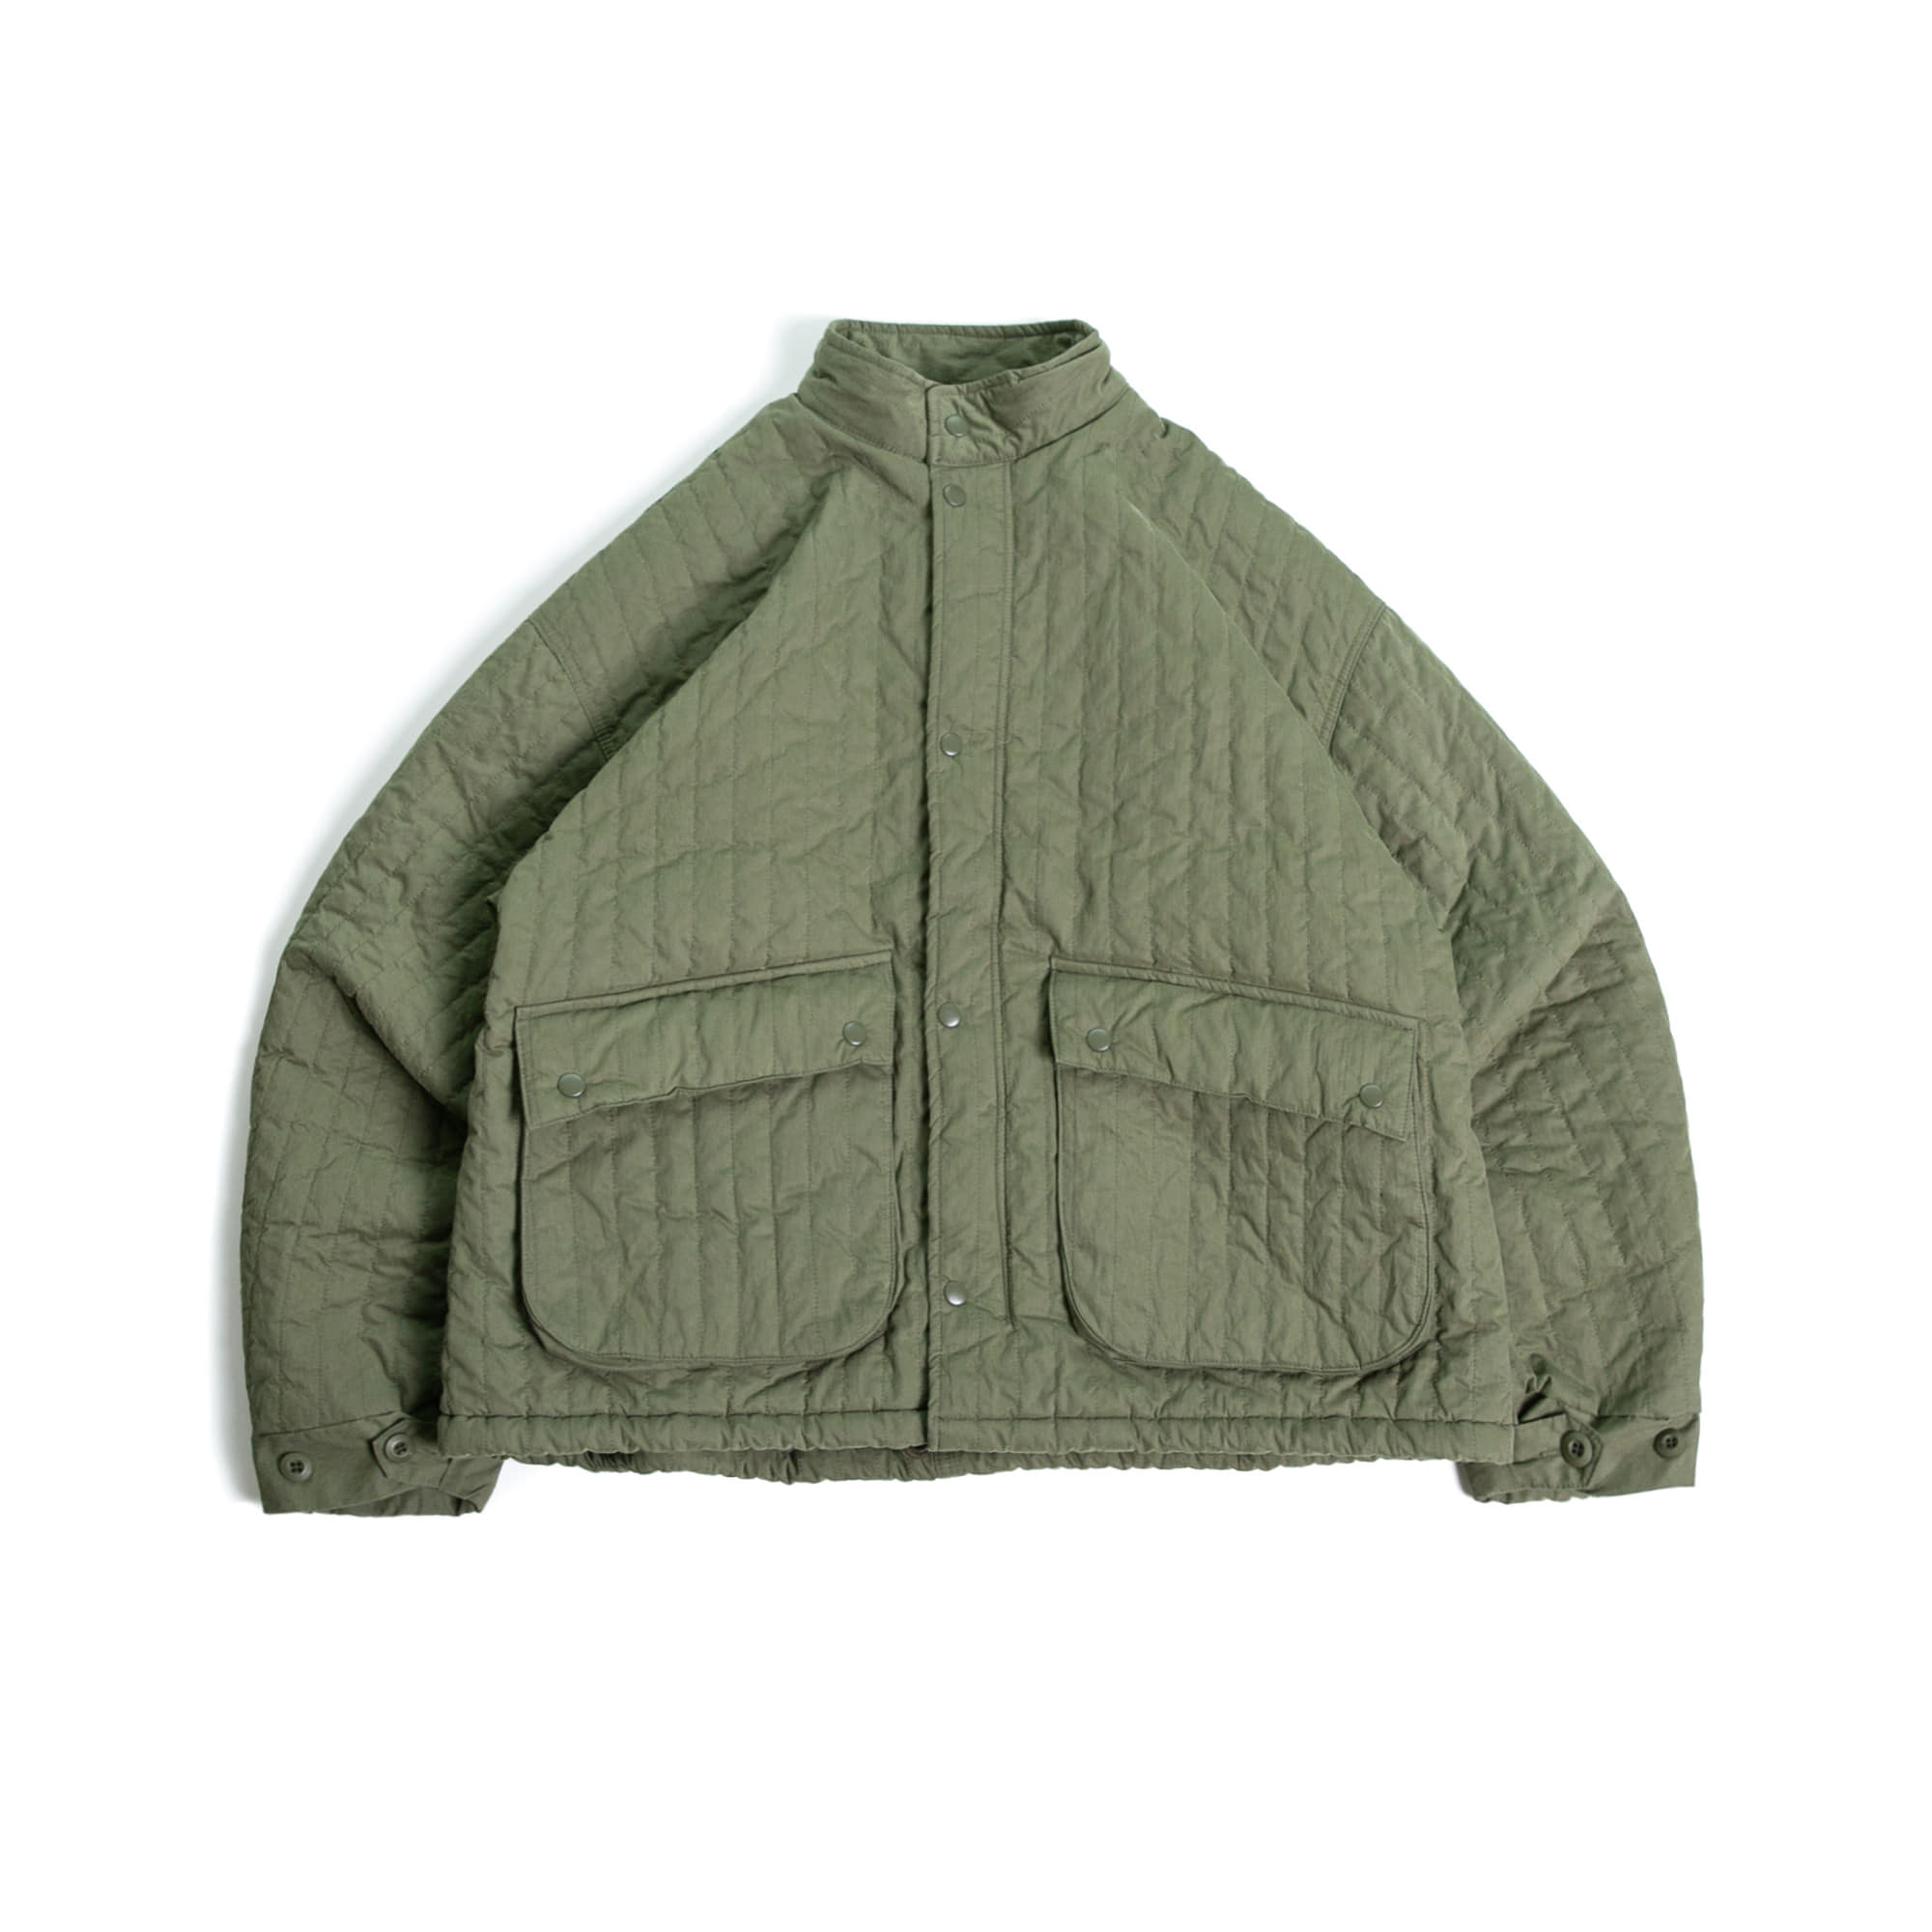 Two Pocket Over Quilting Jacket - Khaki